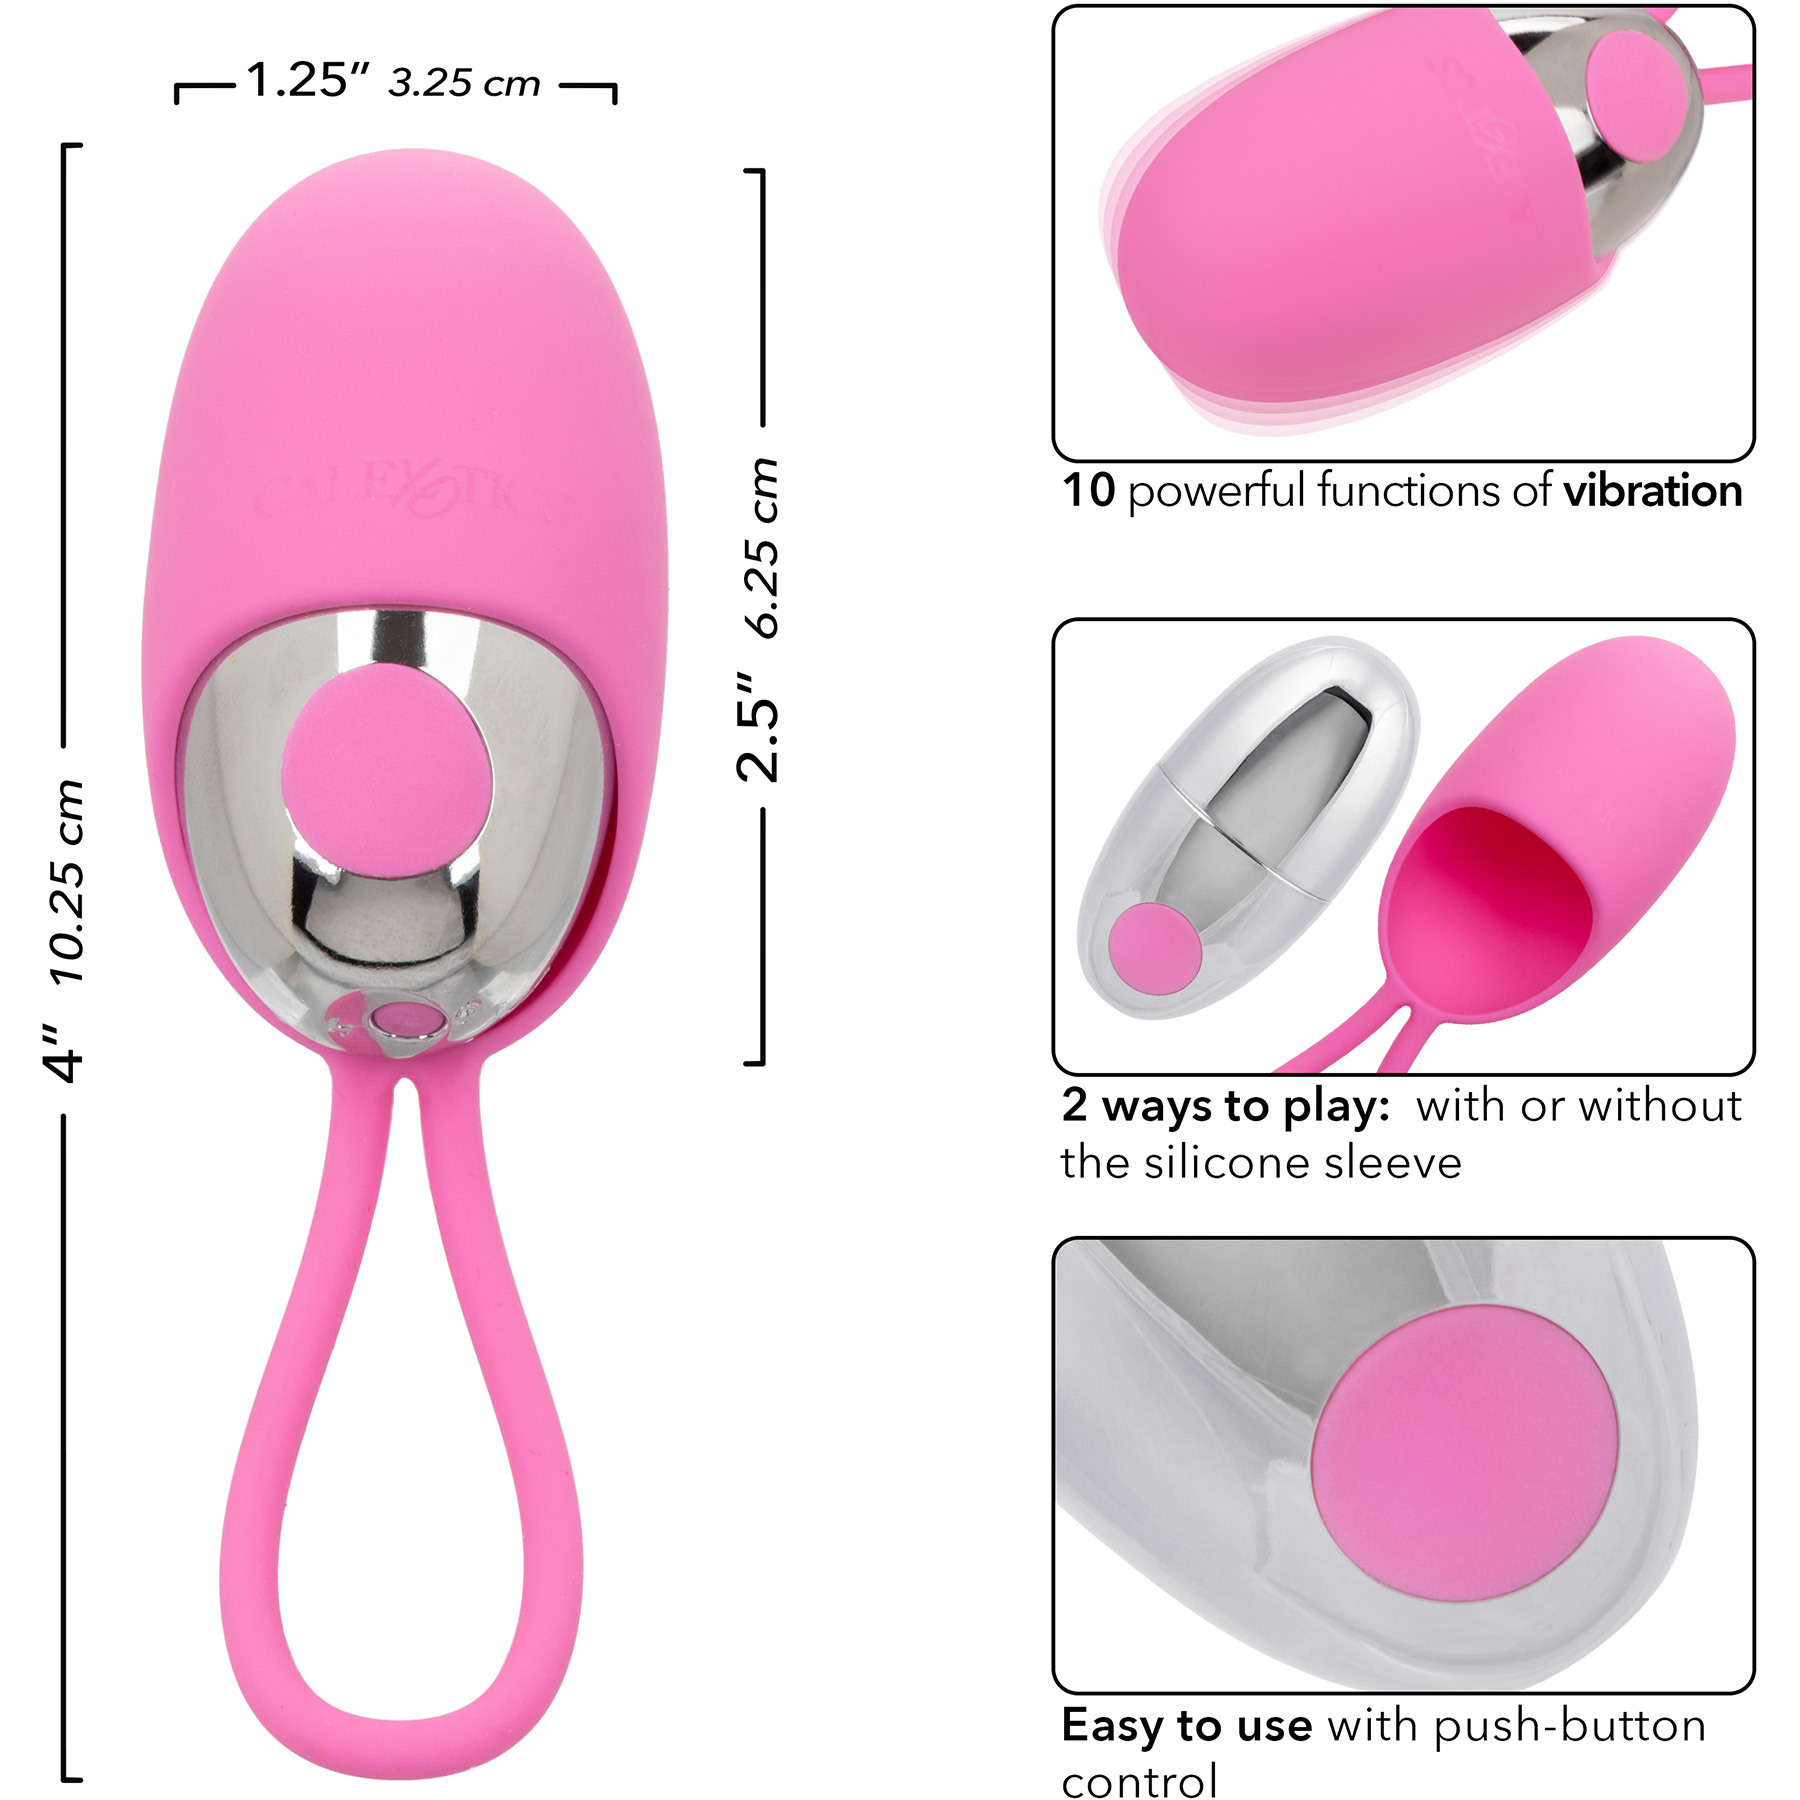 Turbo Buzz Rechargeable Bullet Vibrator With Removable Silicone Sleeve - Measurements